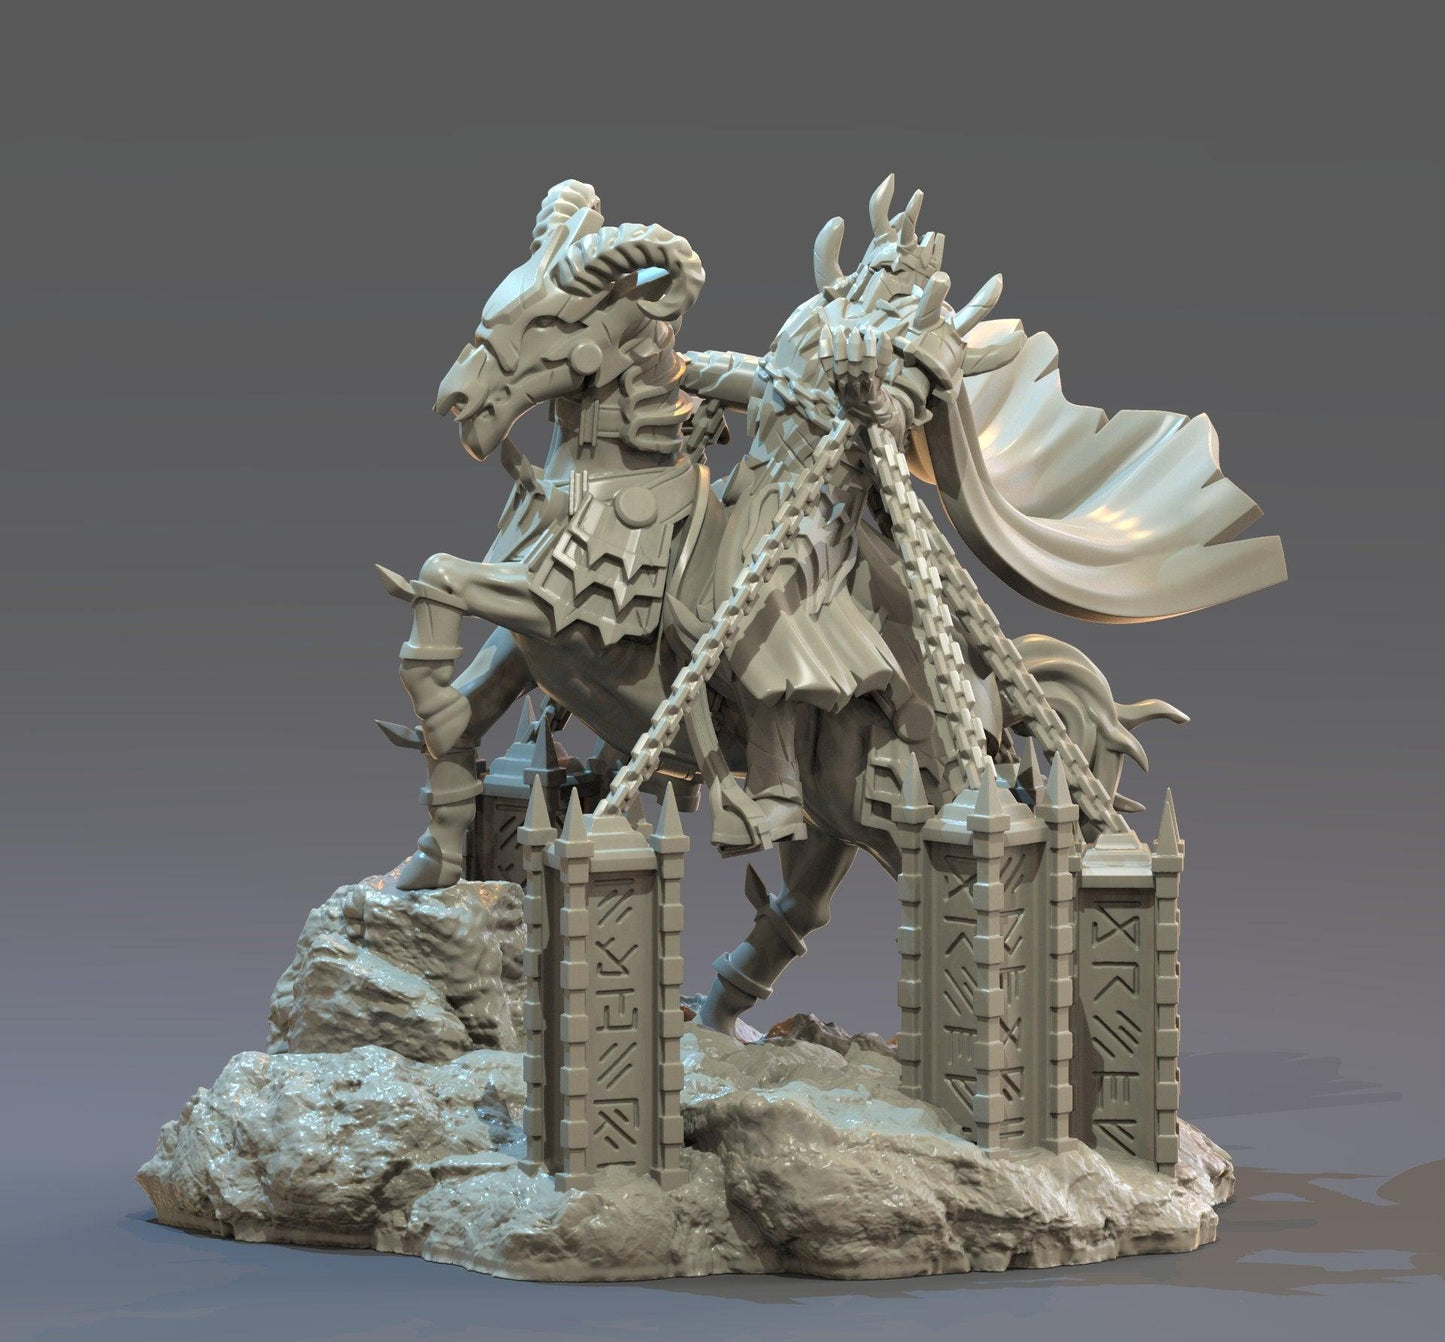 Abaddon Miniature | Clay Cyanide | Angels vs Demons | Tabletop Gaming | DnD Miniature |Dungeons and Dragons, unpainted miniature - Plague Miniatures